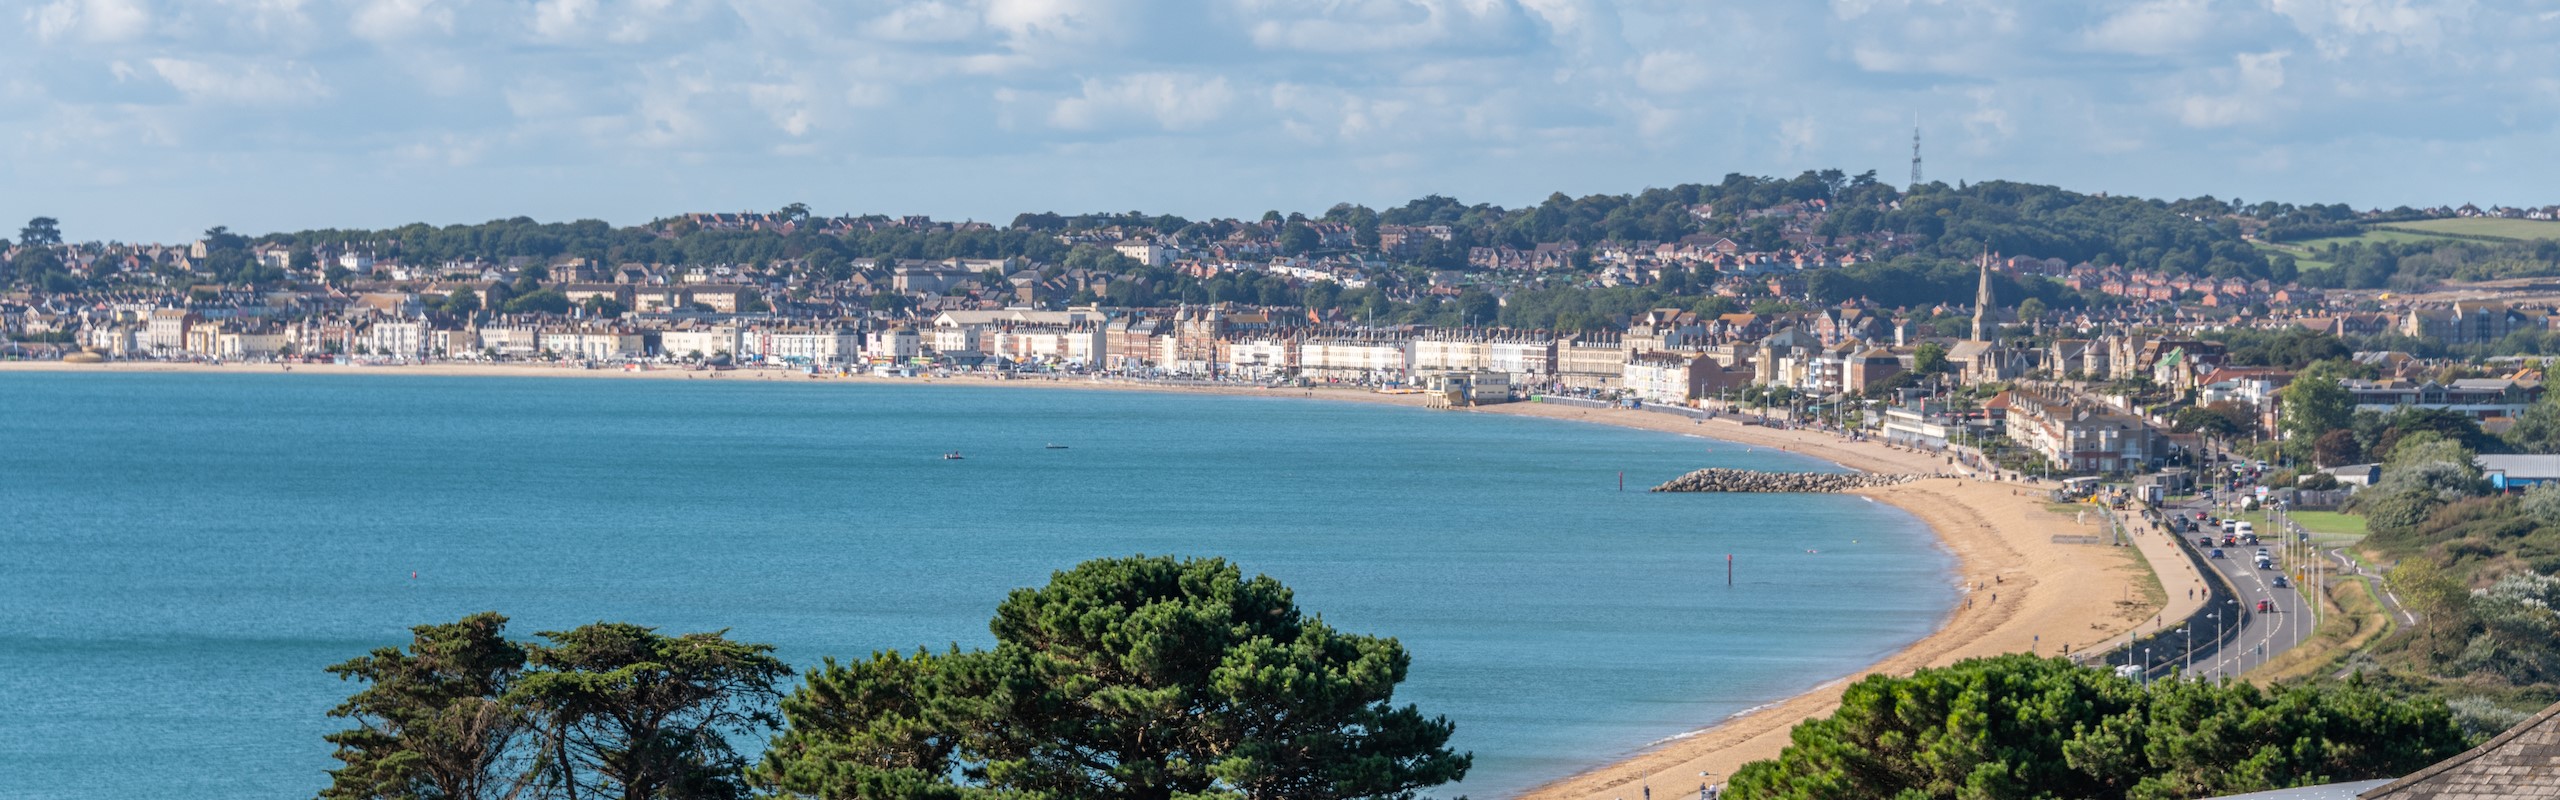 Overlooking Weymouth And Beach